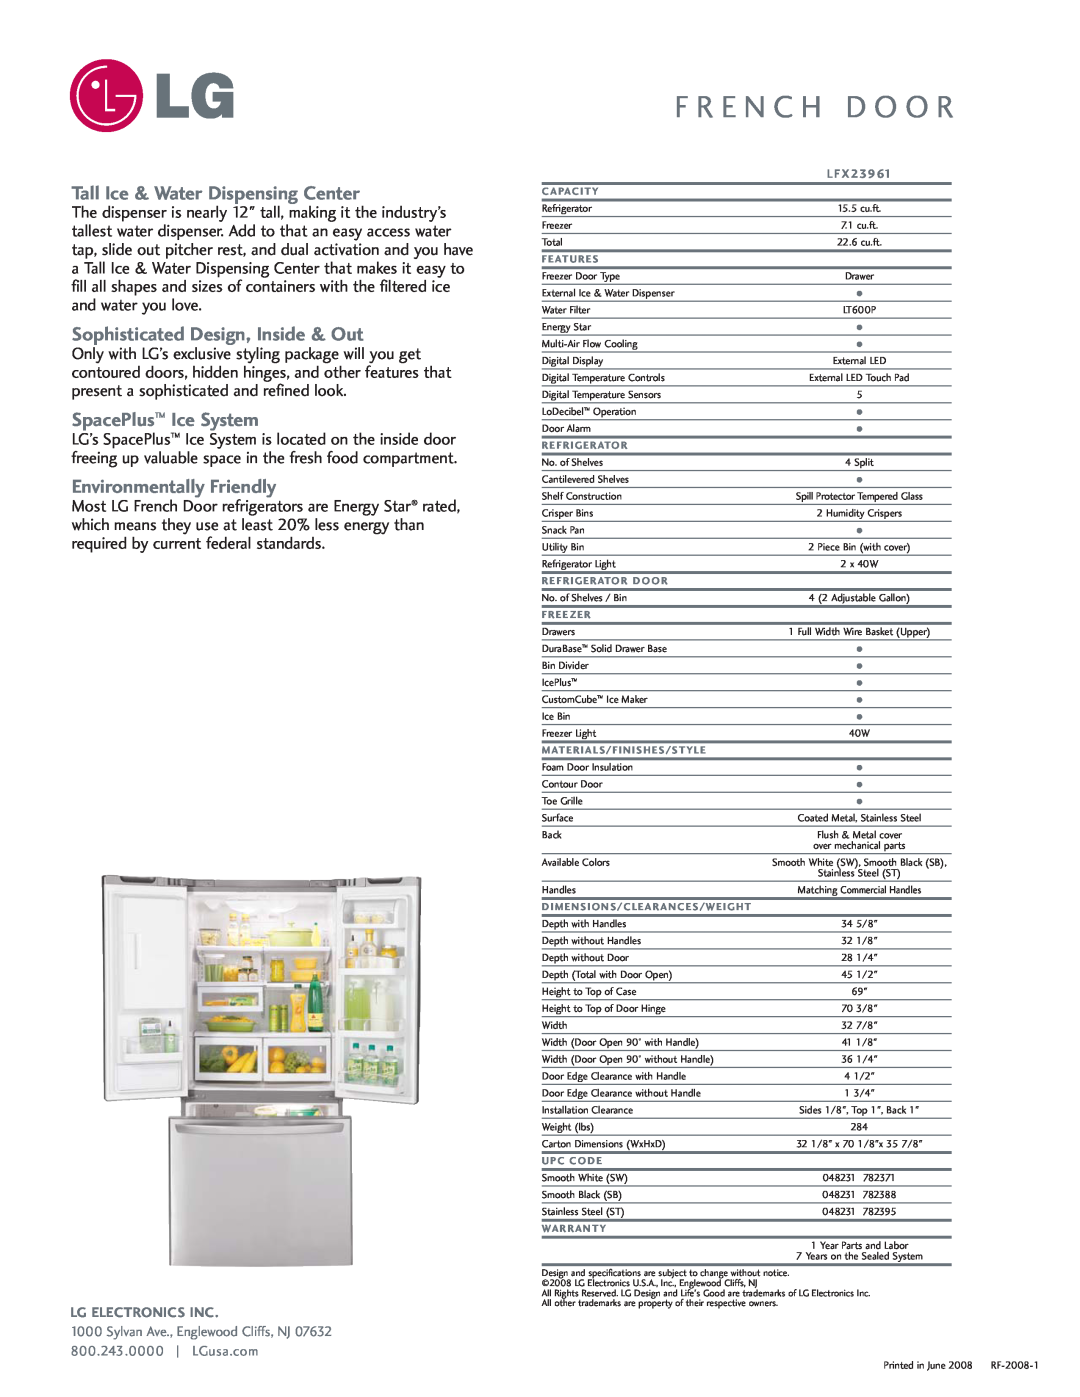 LG Electronics LFX23961 manual Tall Ice & Water Dispensing Center, Sophisticated Design, Inside & Out, SpacePlus Ice System 